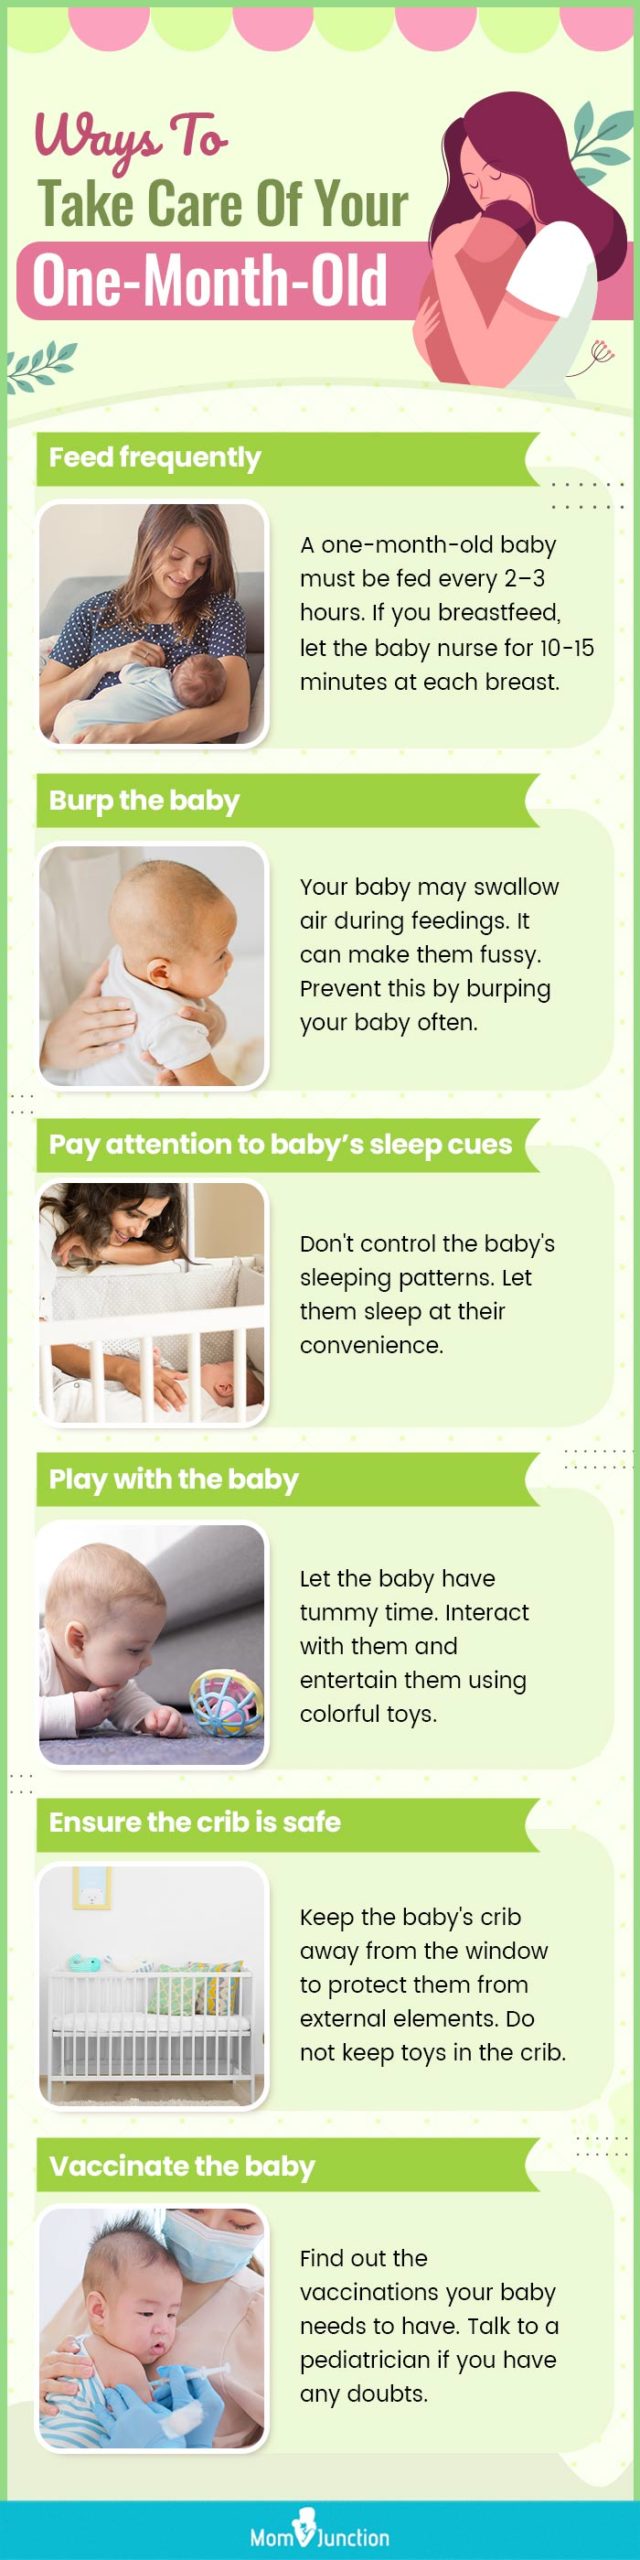 ways to take care of your one month old (infographic)